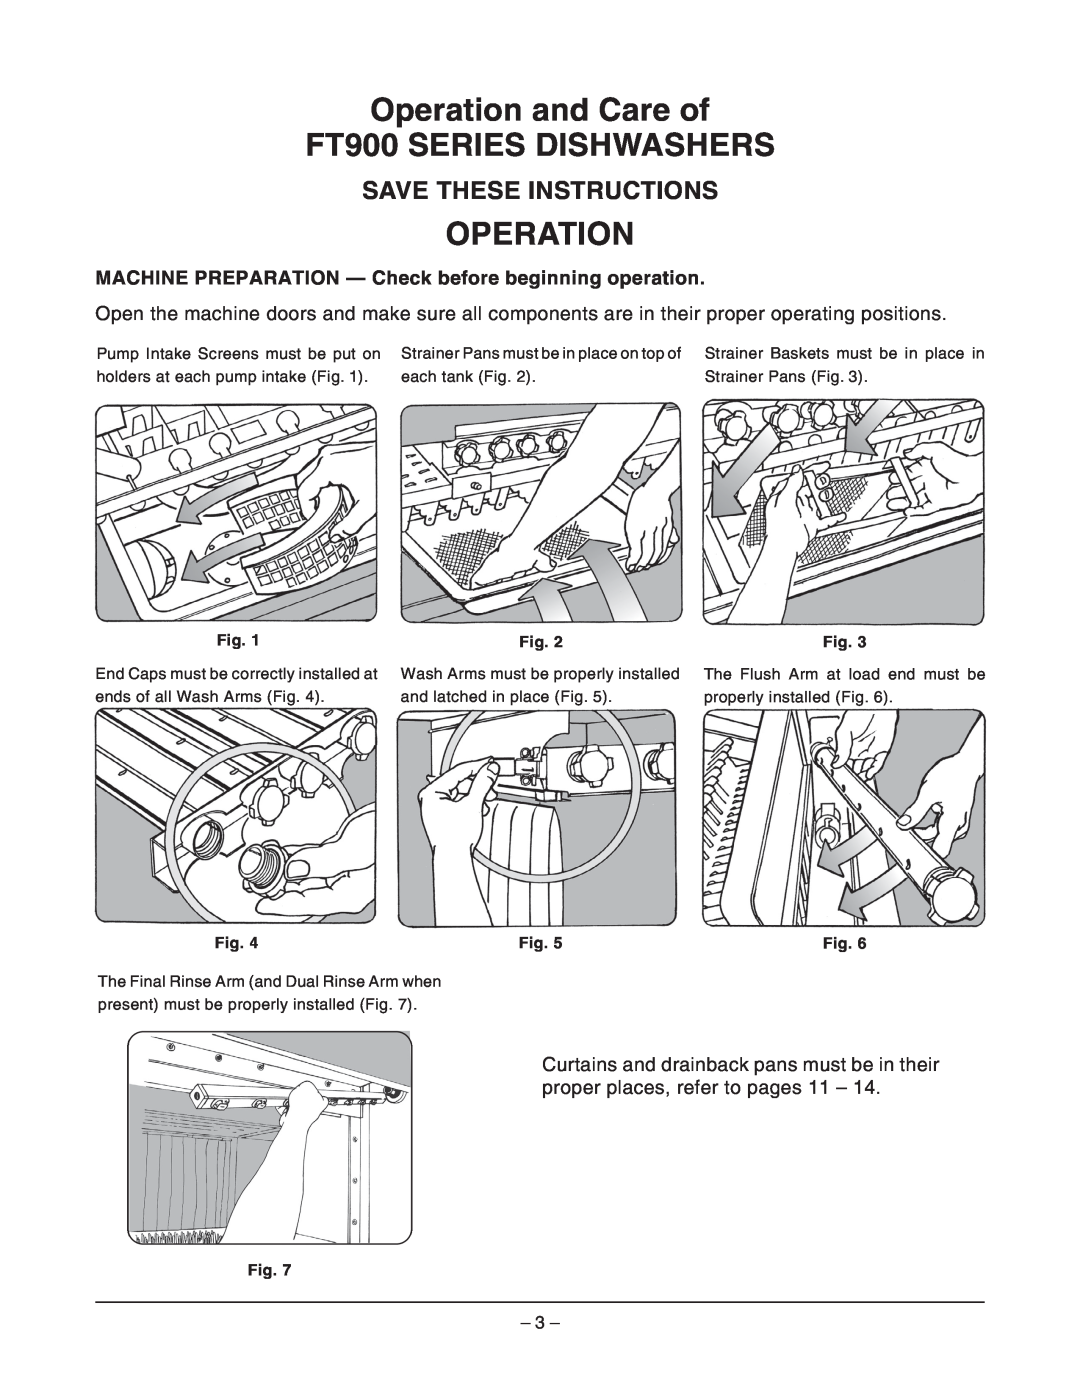 Hobart FT900DBD, FT900SDBD, FT900SBD, FT900BD manual Operation and Care of FT900 SERIES DISHWASHERS, Save These Instructions 